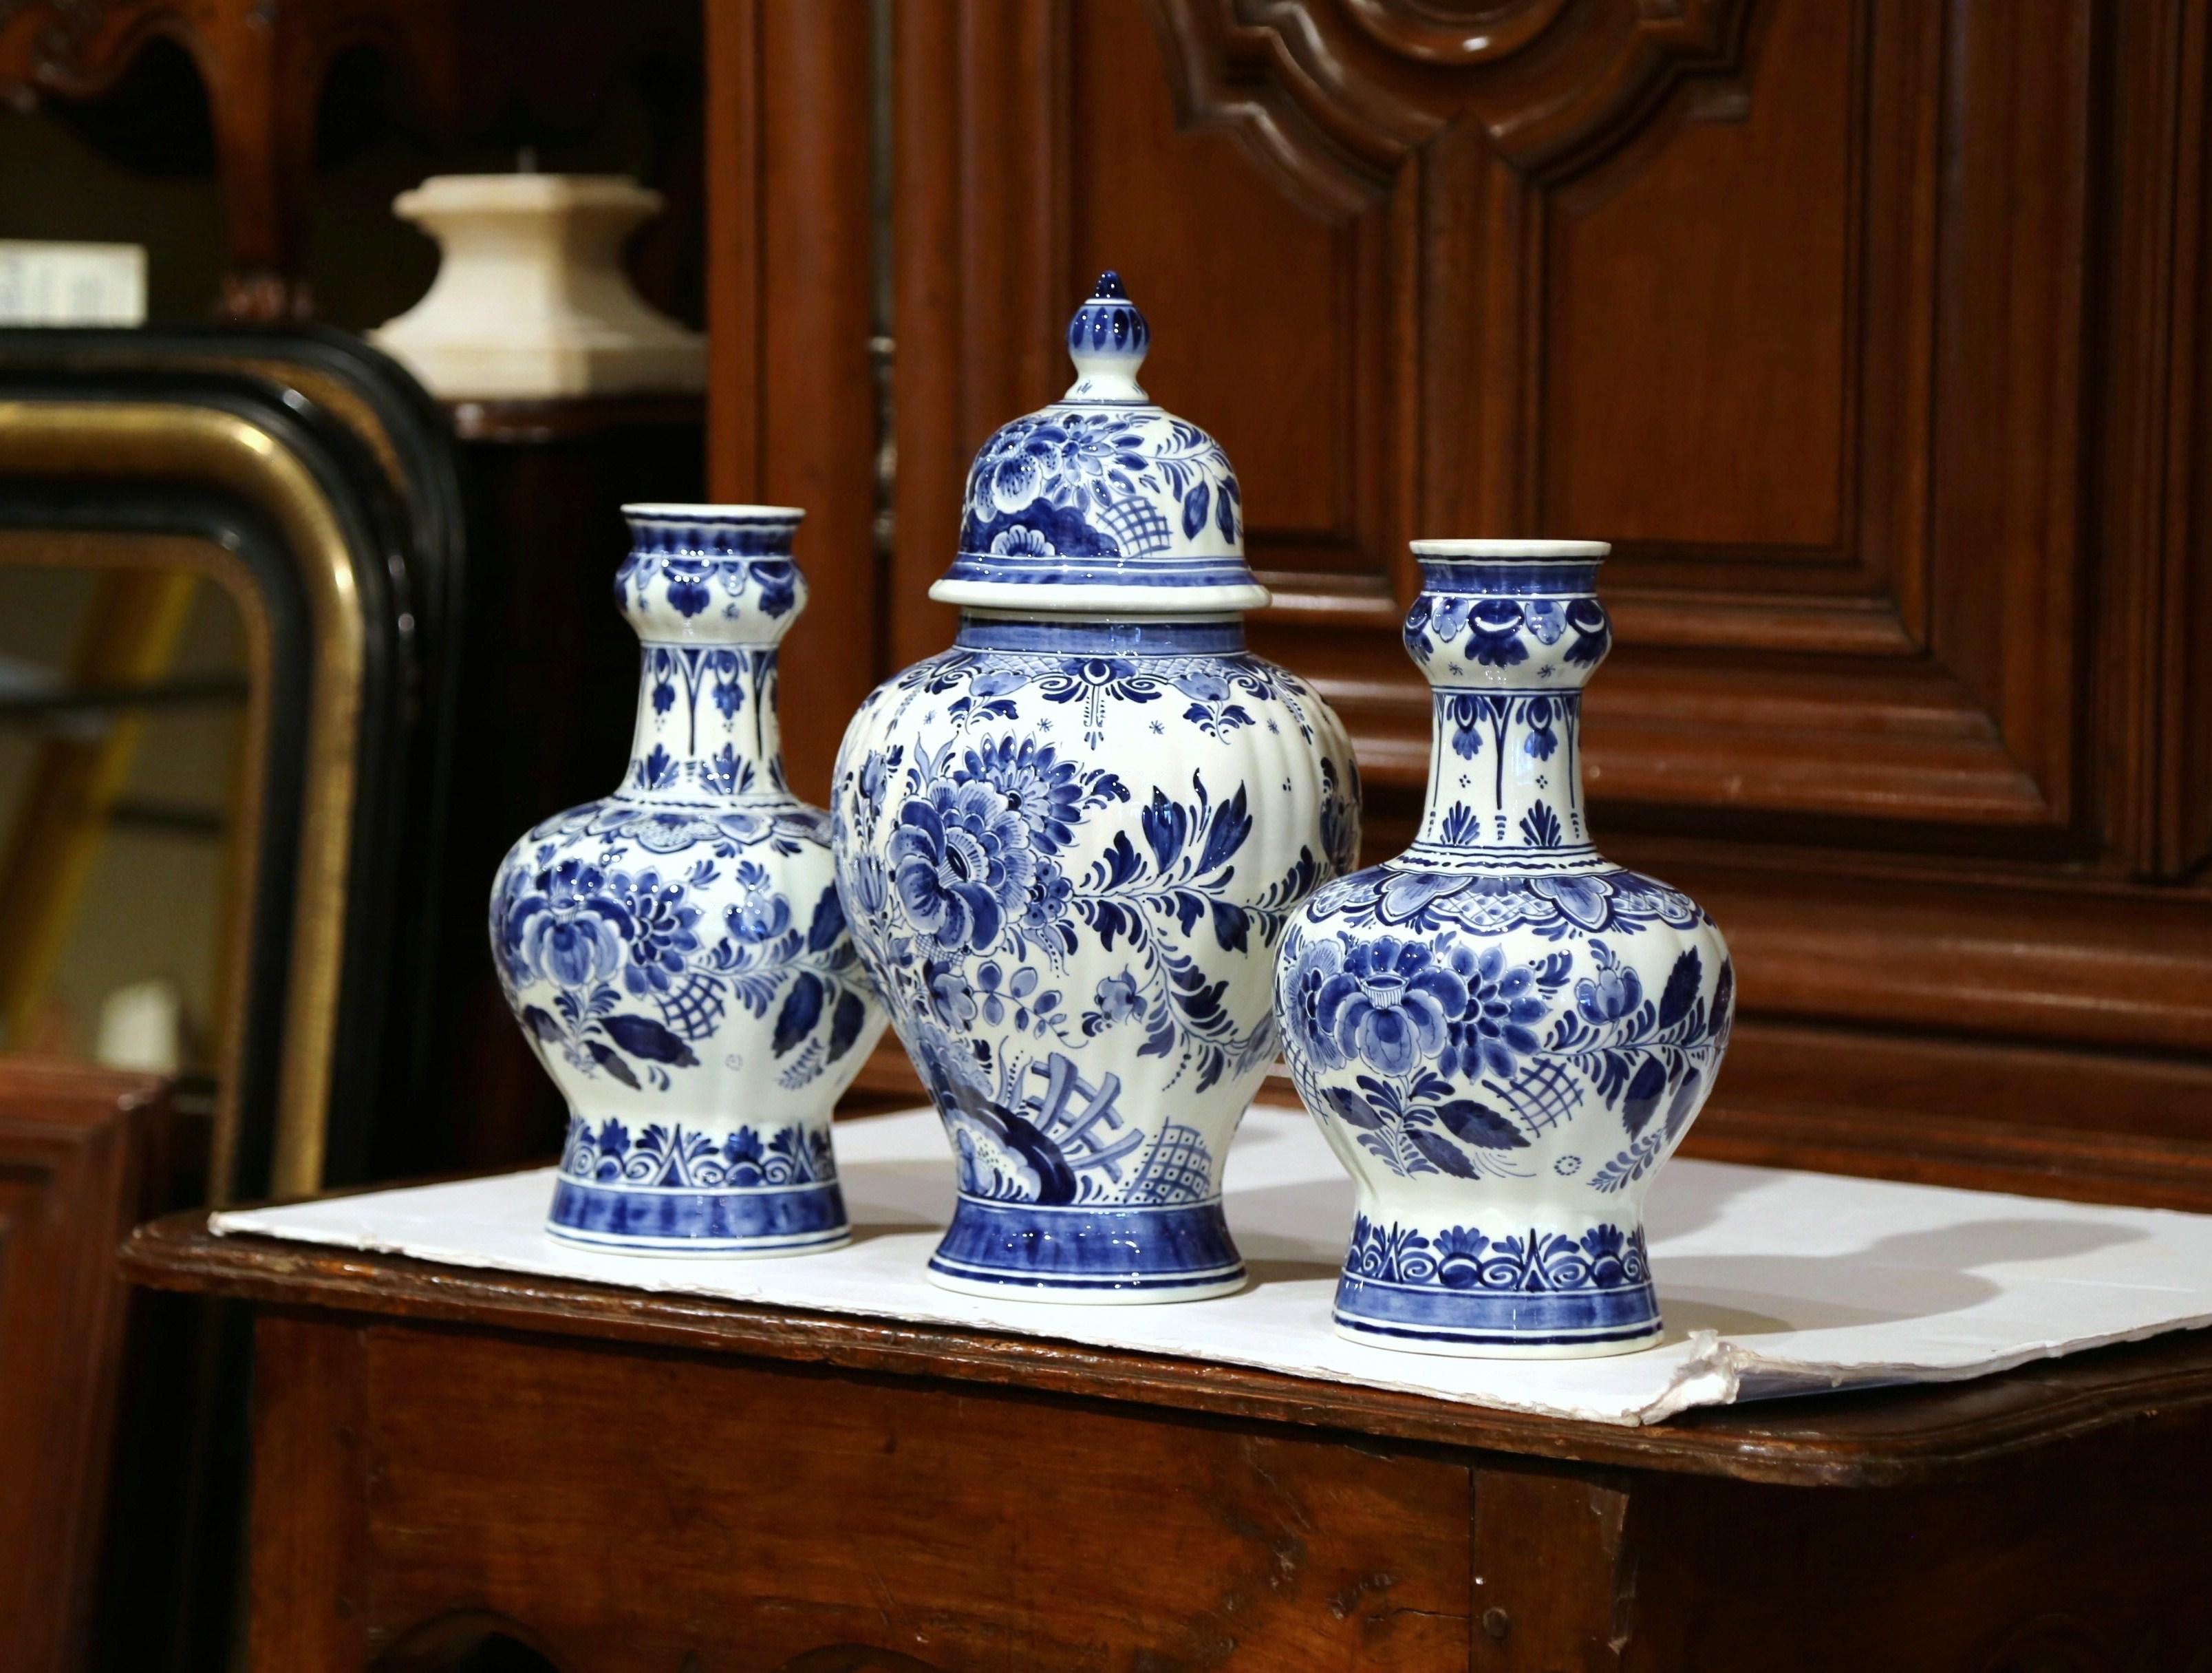 Decorate your mantel or your entry way console with this elegant set of Delft vases; crafted circa 1950, each hand-painted vase with matching jar, features floral decor in the blue and white palette. The tall ginger jar as a dome shaped lid with top